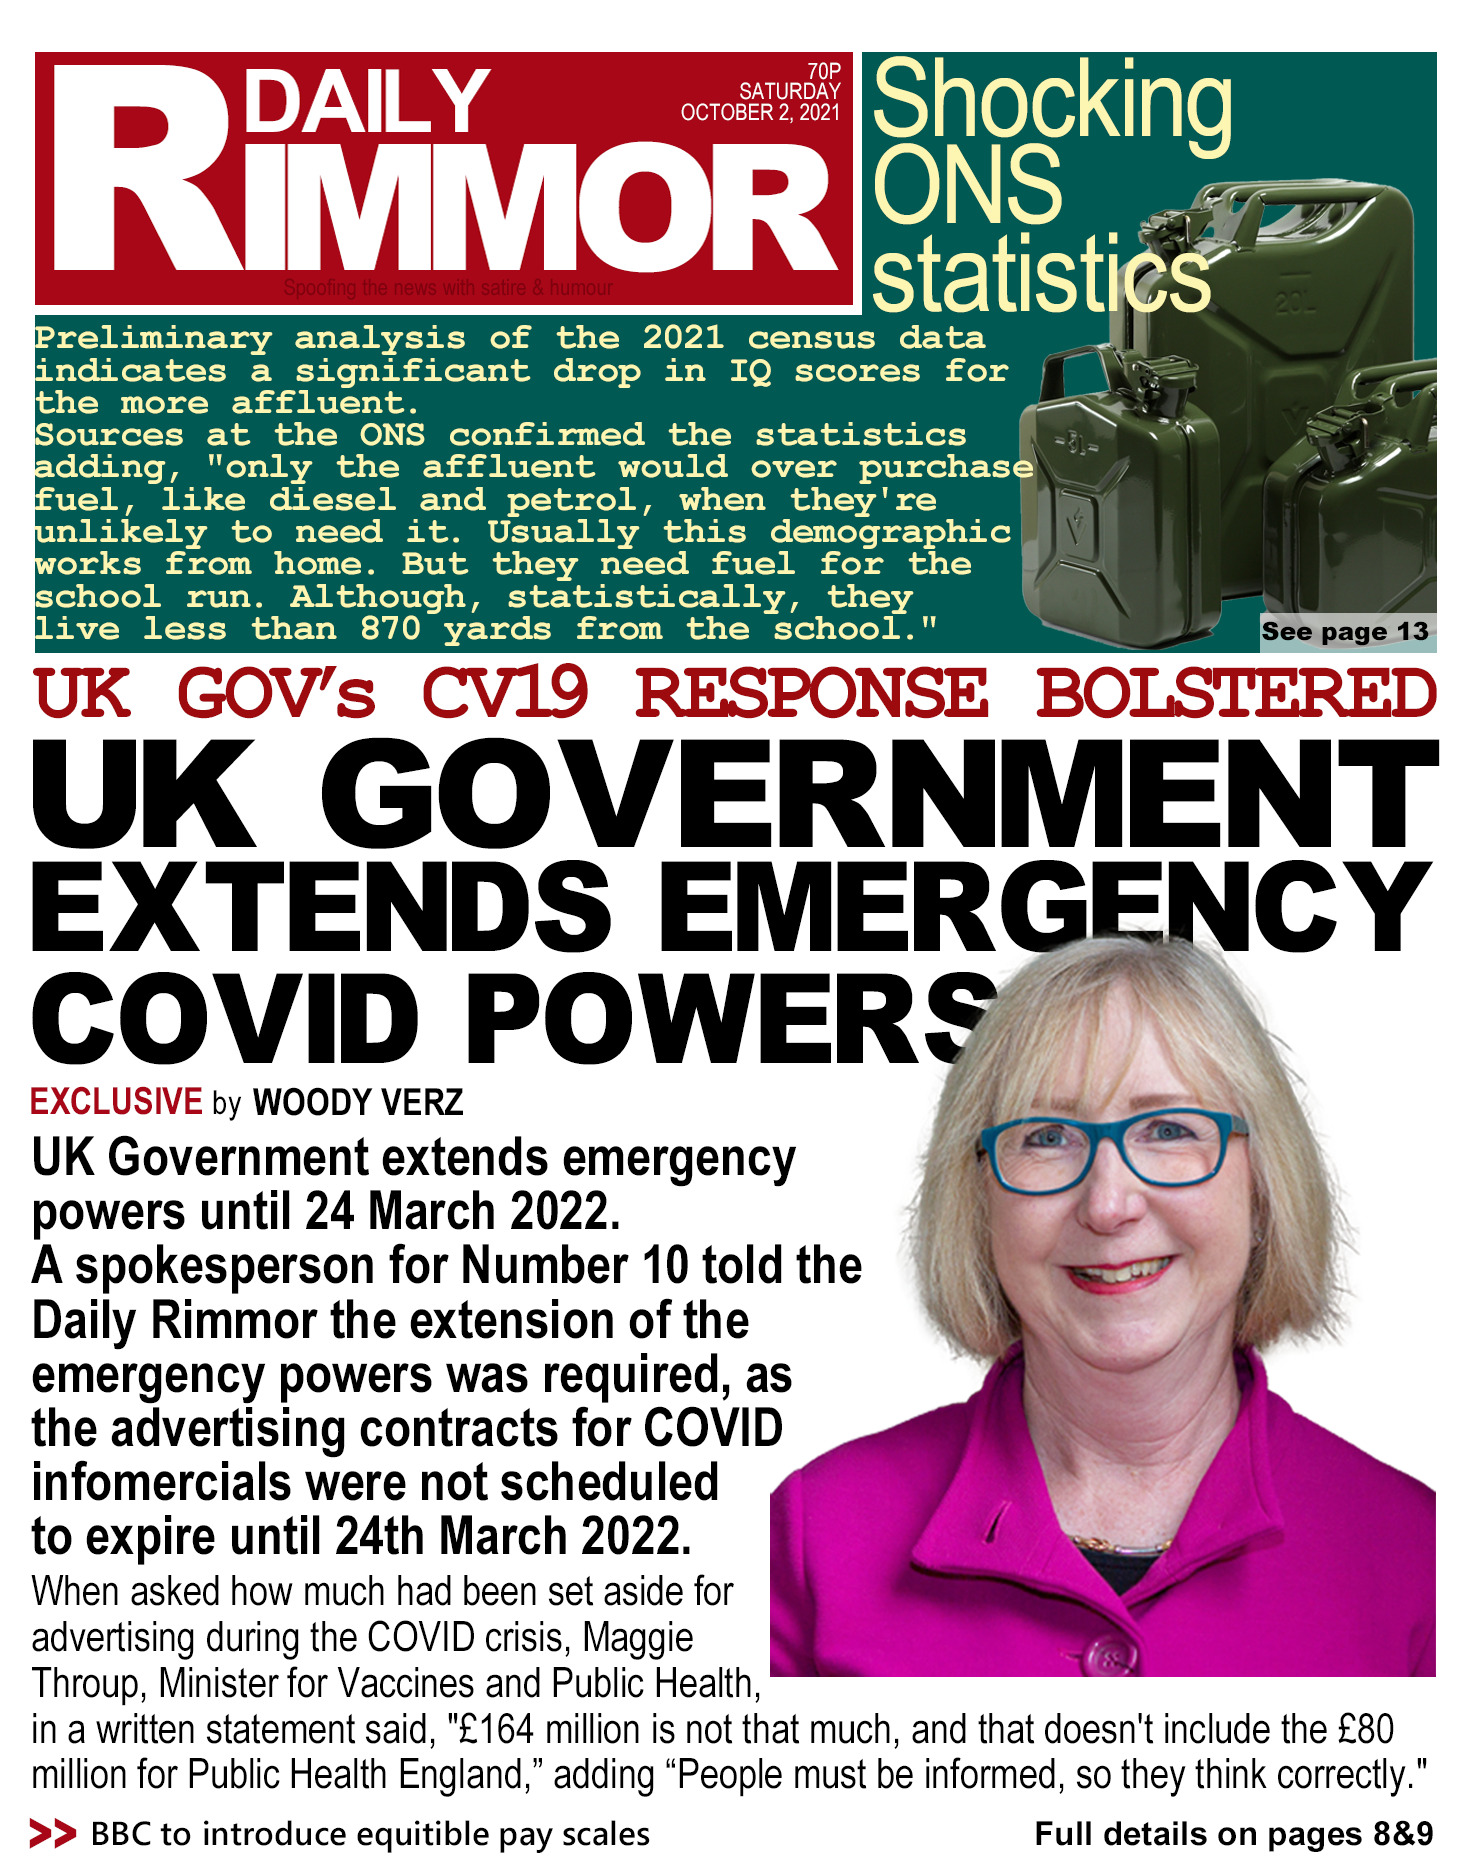 Daily Rimmor front page. COVID-19, Saturday 2 October